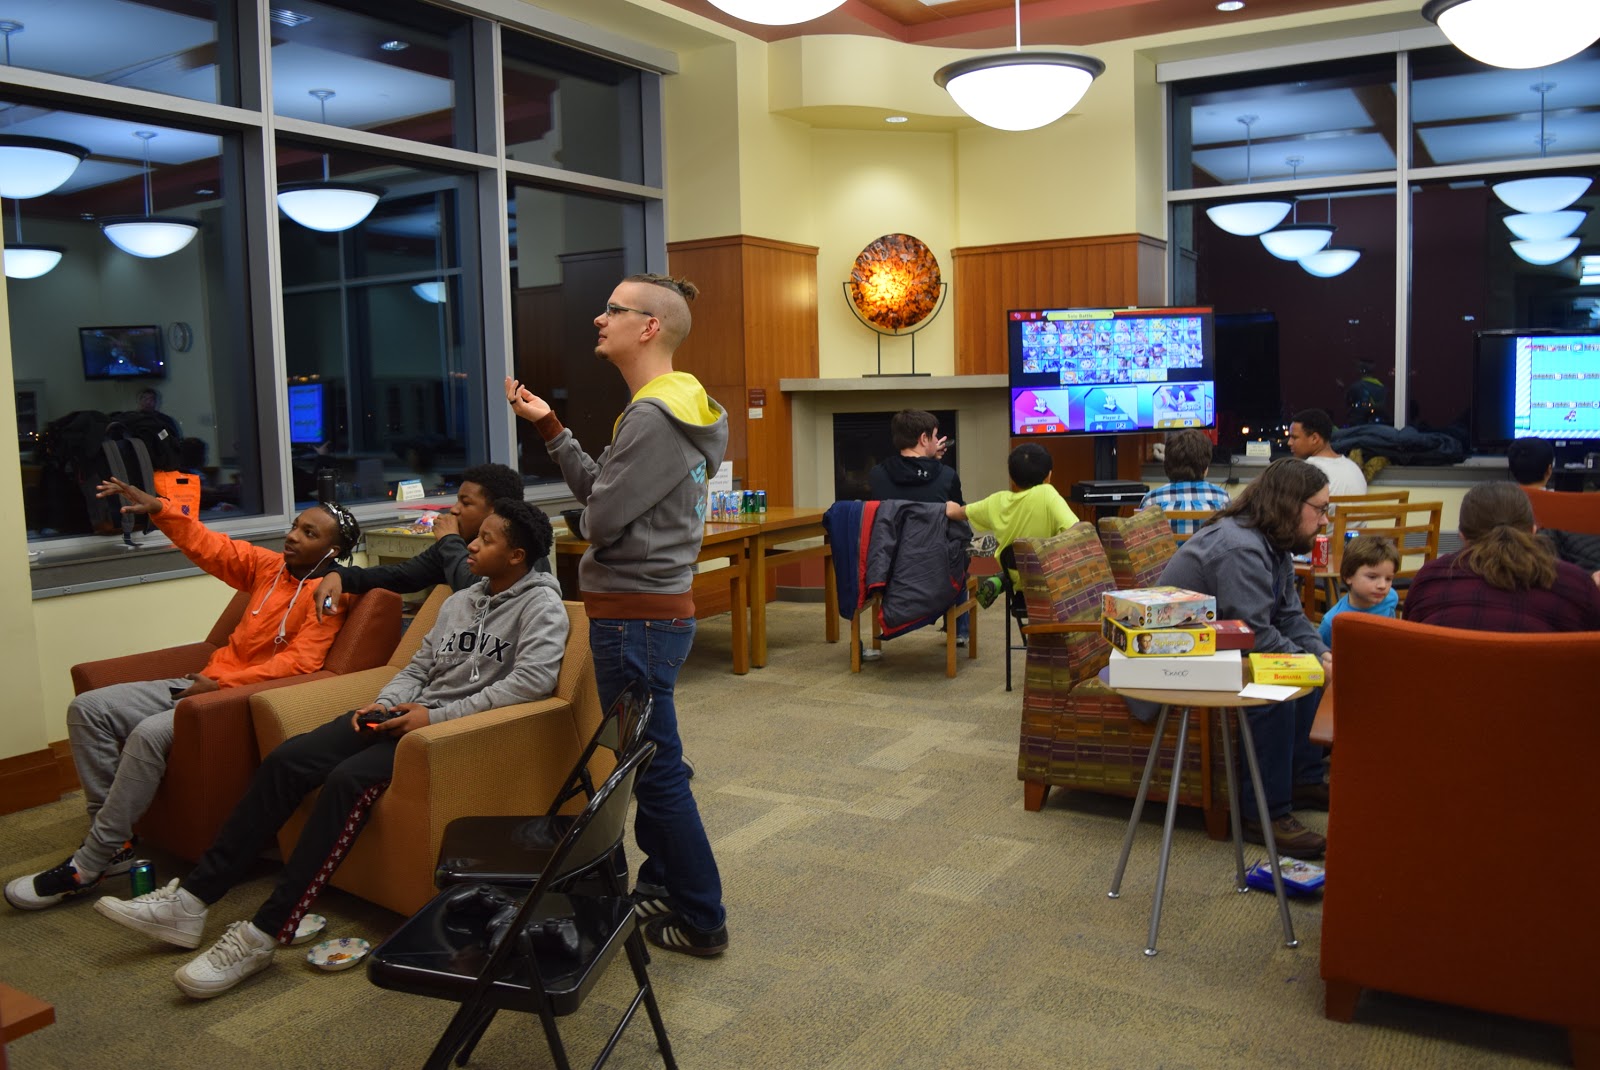 Librarian Zorian Sasyk, standing, with video gamers at Game Night on Feb. 19, 2019. (Margot M. Barry / The Metropolitan)